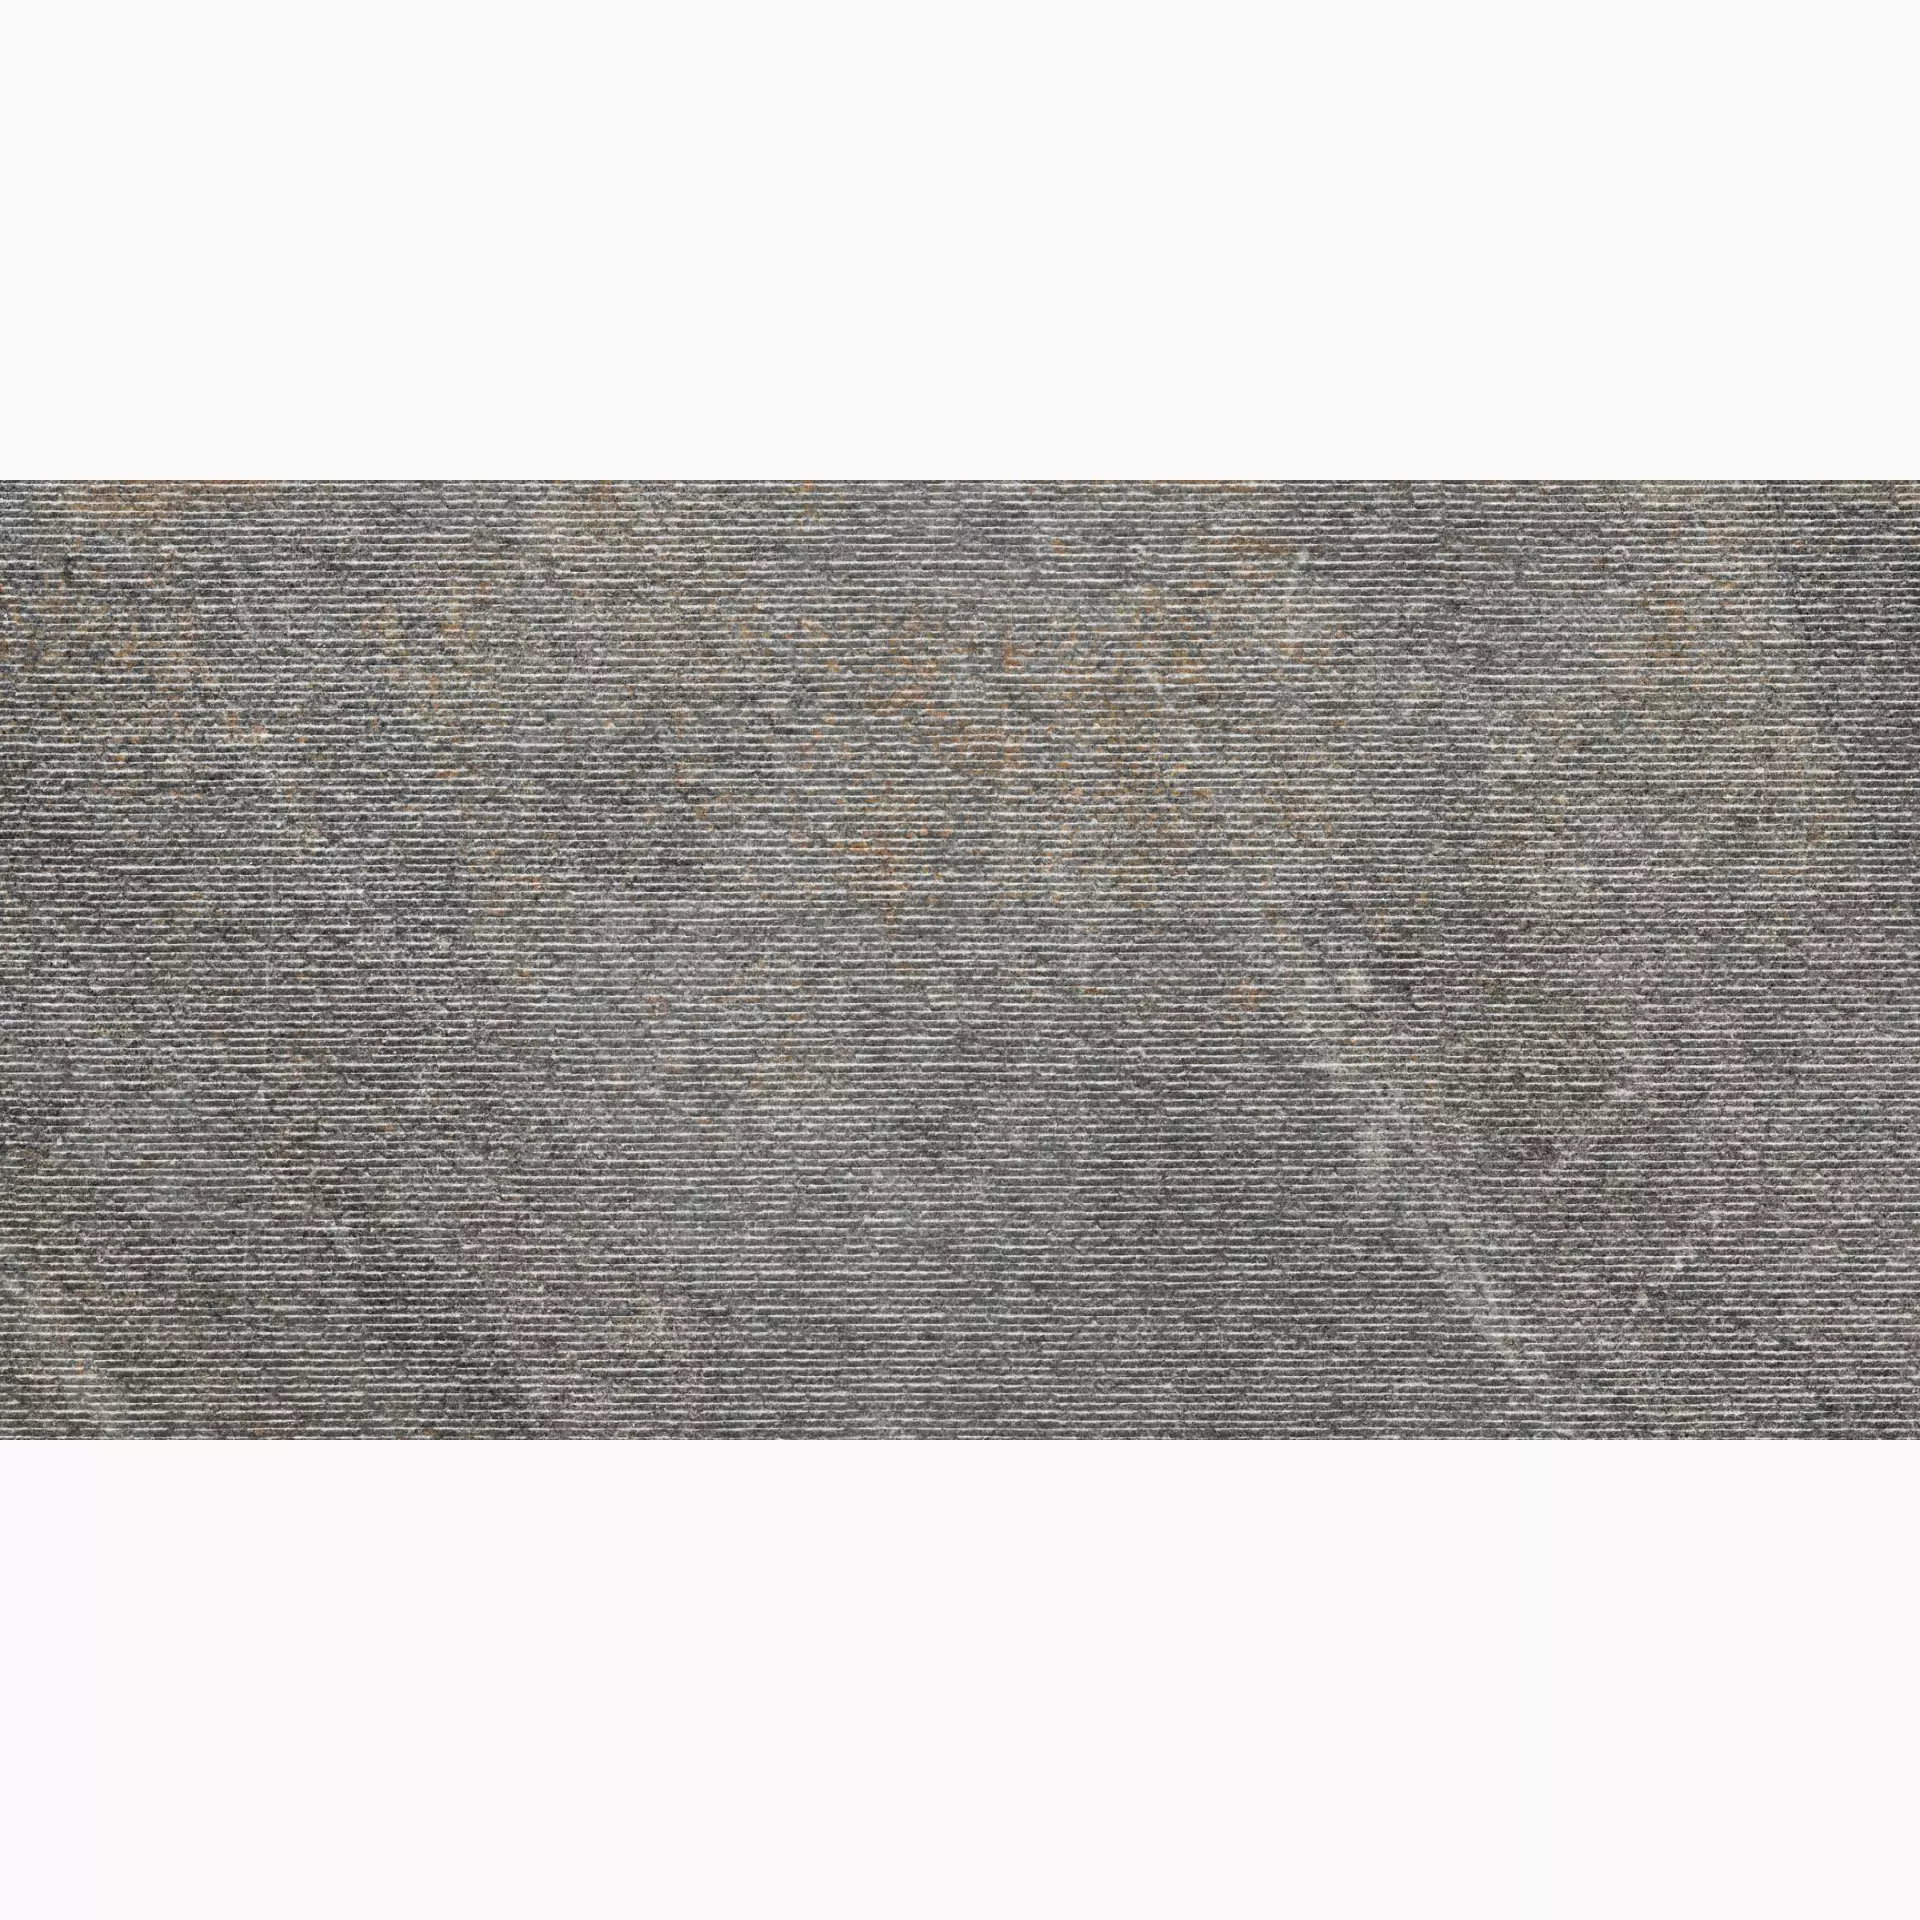 ABK Poetry Stone Smoke Naturale Decor Carving PF60010802 60x120cm rectified 8,5mm